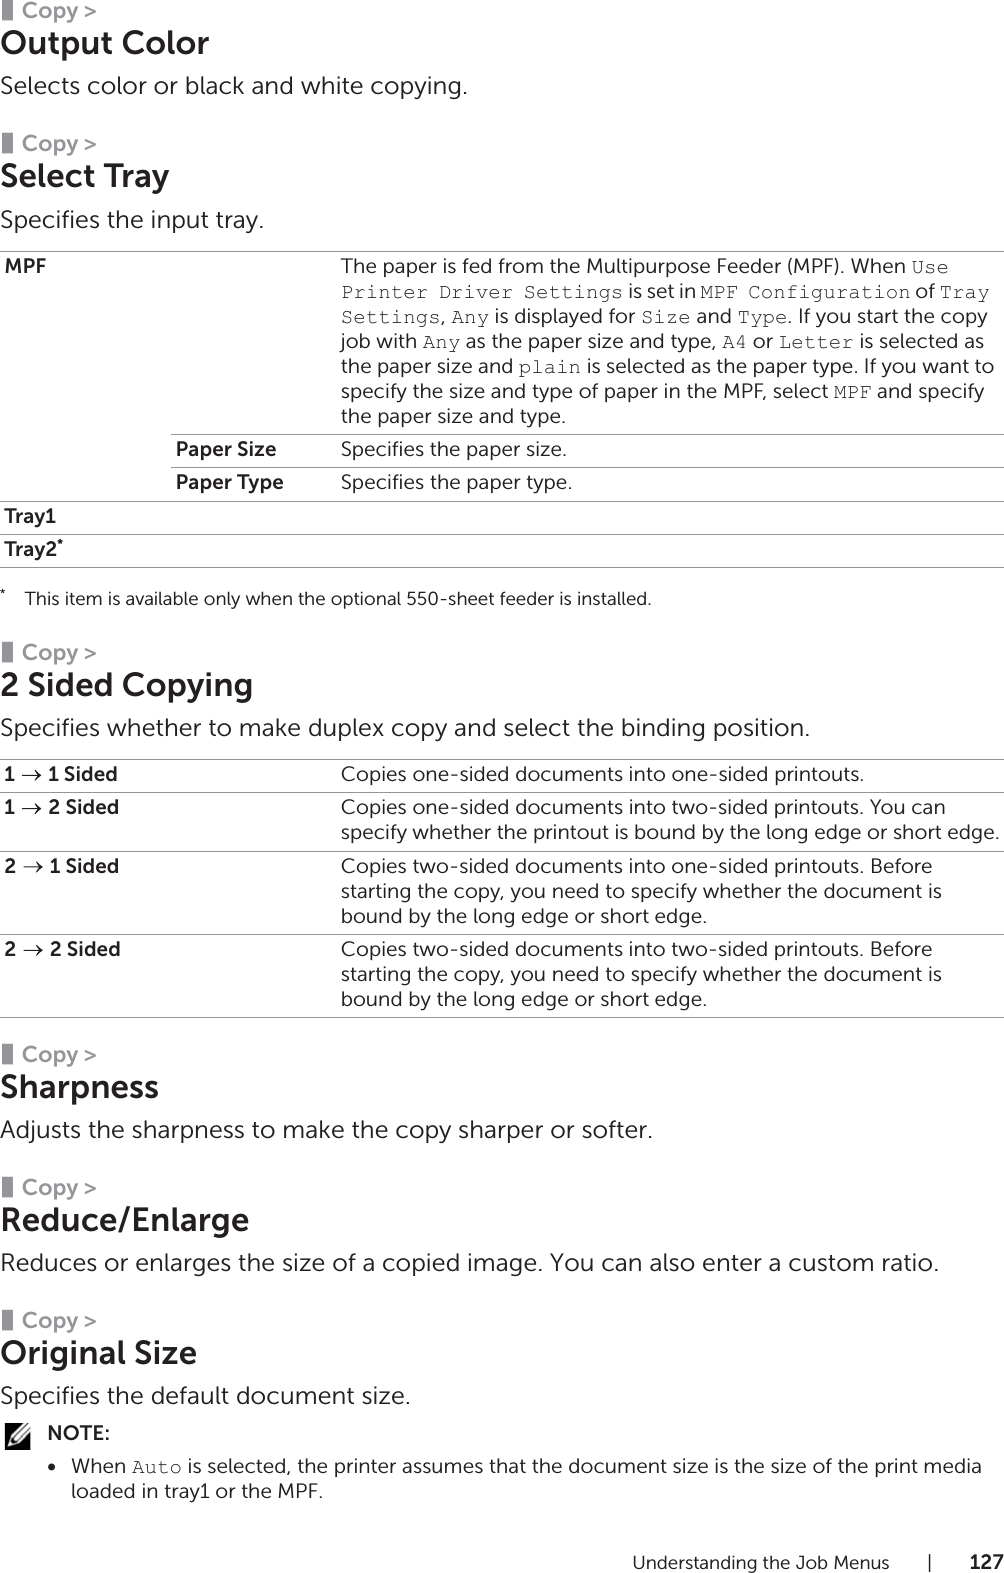 Understanding the Job Menus |127❚Copy &gt;Output ColorSelects color or black and white copying.❚Copy &gt;Select TraySpecifies the input tray.*This item is available only when the optional 550-sheet feeder is installed.❚Copy &gt;2 Sided CopyingSpecifies whether to make duplex copy and select the binding position.❚Copy &gt;SharpnessAdjusts the sharpness to make the copy sharper or softer.❚Copy &gt;Reduce/EnlargeReduces or enlarges the size of a copied image. You can also enter a custom ratio.❚Copy &gt;Original SizeSpecifies the default document size.NOTE:•When Auto is selected, the printer assumes that the document size is the size of the print media loaded in tray1 or the MPF.MPF The paper is fed from the Multipurpose Feeder (MPF). When Use Printer Driver Settings is set in MPF Configuration of Tray Settings, Any is displayed for Size and Type. If you start the copy job with Any as the paper size and type, A4 or Letter is selected as the paper size and plain is selected as the paper type. If you want to specify the size and type of paper in the MPF, select MPF and specify the paper size and type.Paper Size Specifies the paper size.Paper Type Specifies the paper type.Tray1Tray2*1   1 Sided Copies one-sided documents into one-sided printouts.1  2 Sided Copies one-sided documents into two-sided printouts. You can specify whether the printout is bound by the long edge or short edge.2   1 Sided Copies two-sided documents into one-sided printouts. Before starting the copy, you need to specify whether the document is bound by the long edge or short edge.2  2 Sided Copies two-sided documents into two-sided printouts. Before starting the copy, you need to specify whether the document is bound by the long edge or short edge.